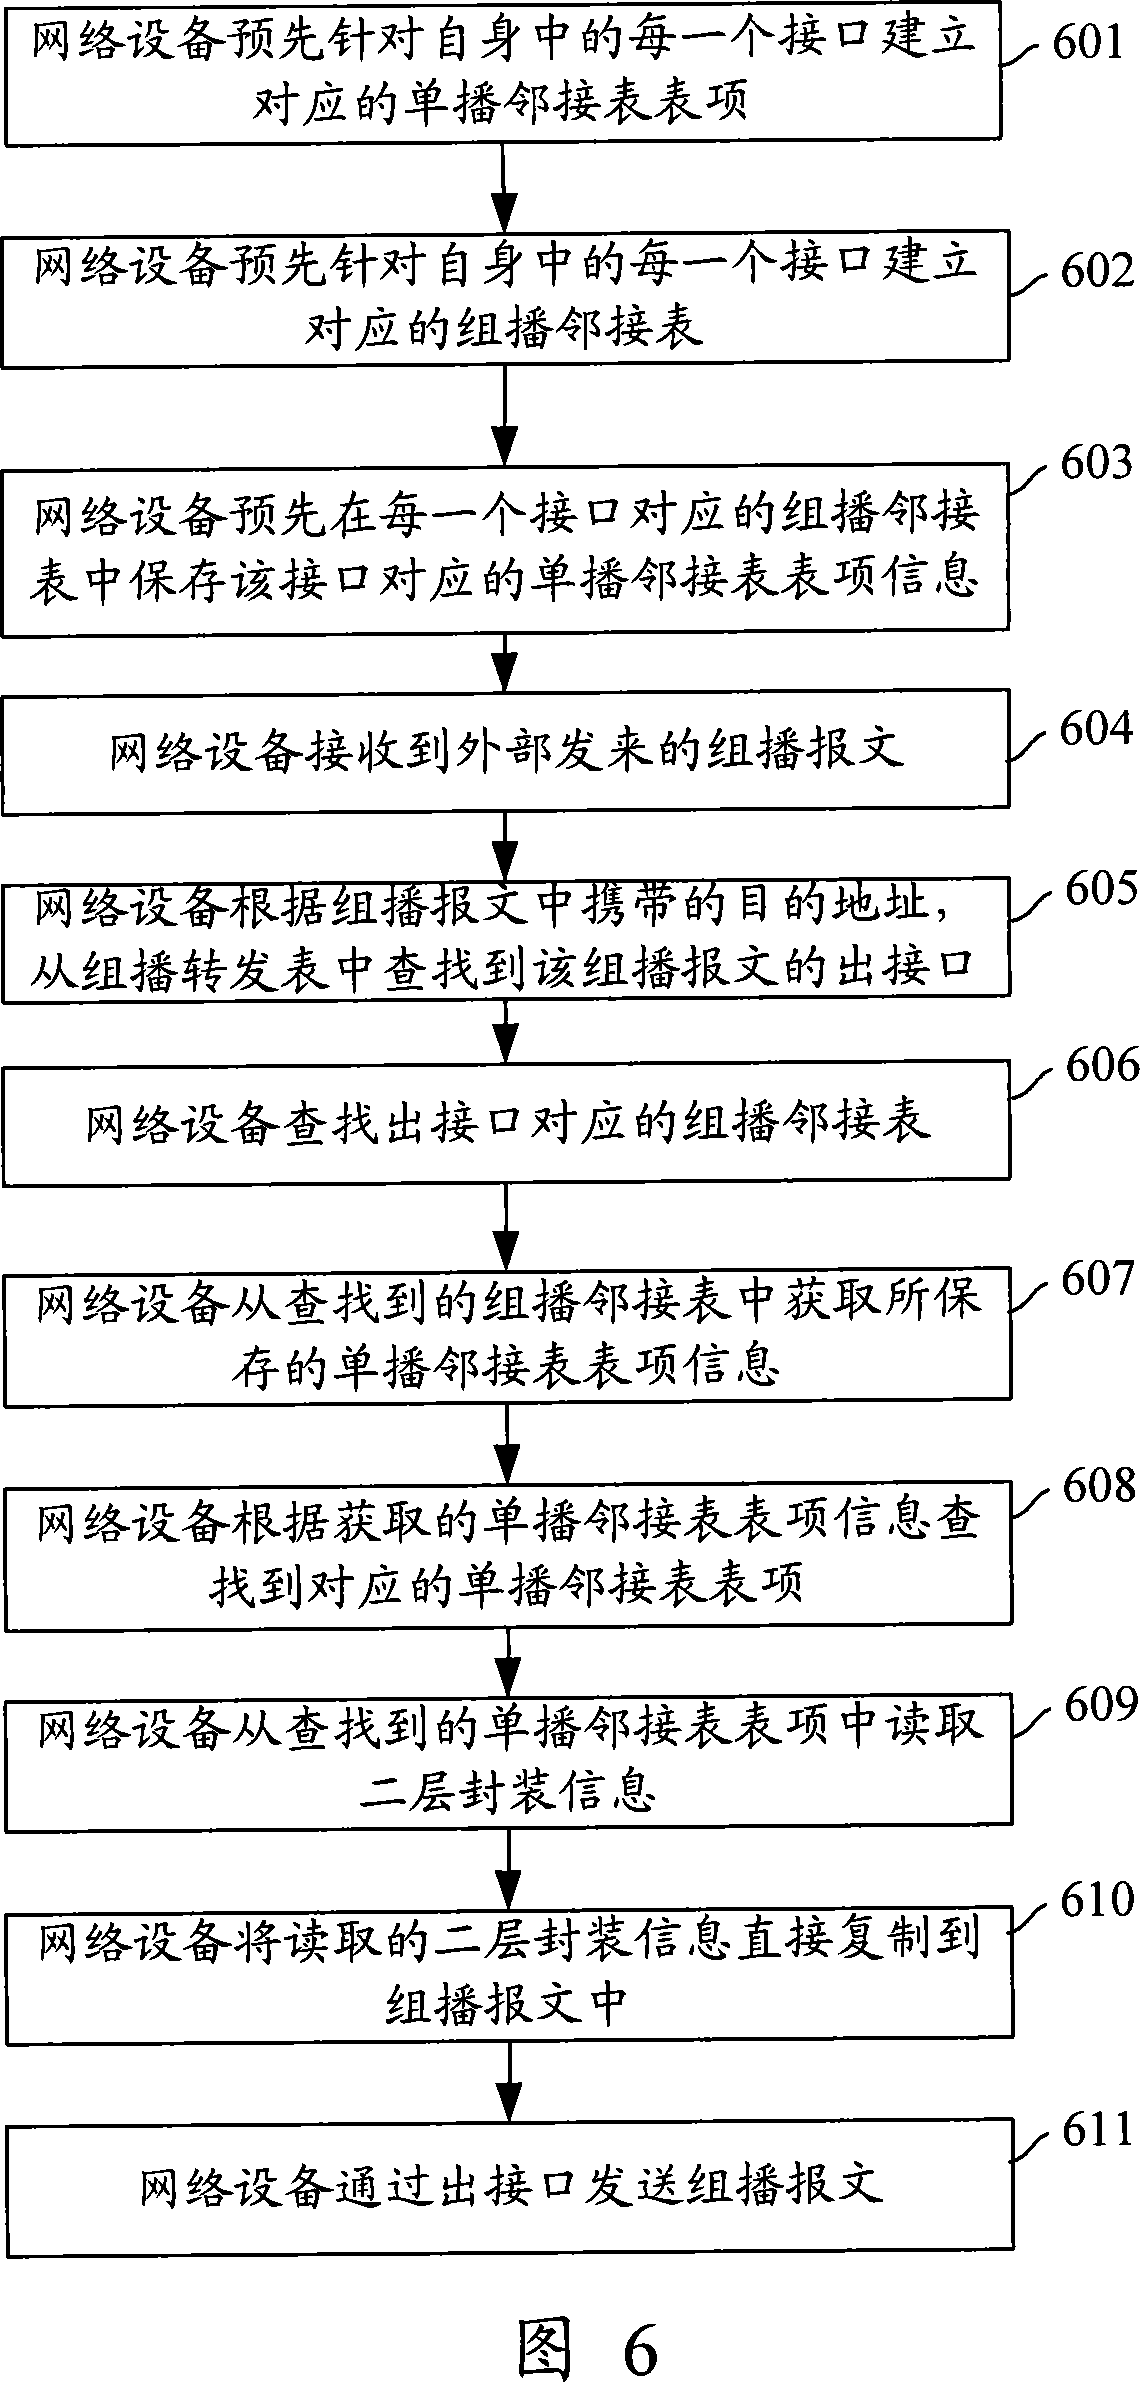 Method and device for transmitting message